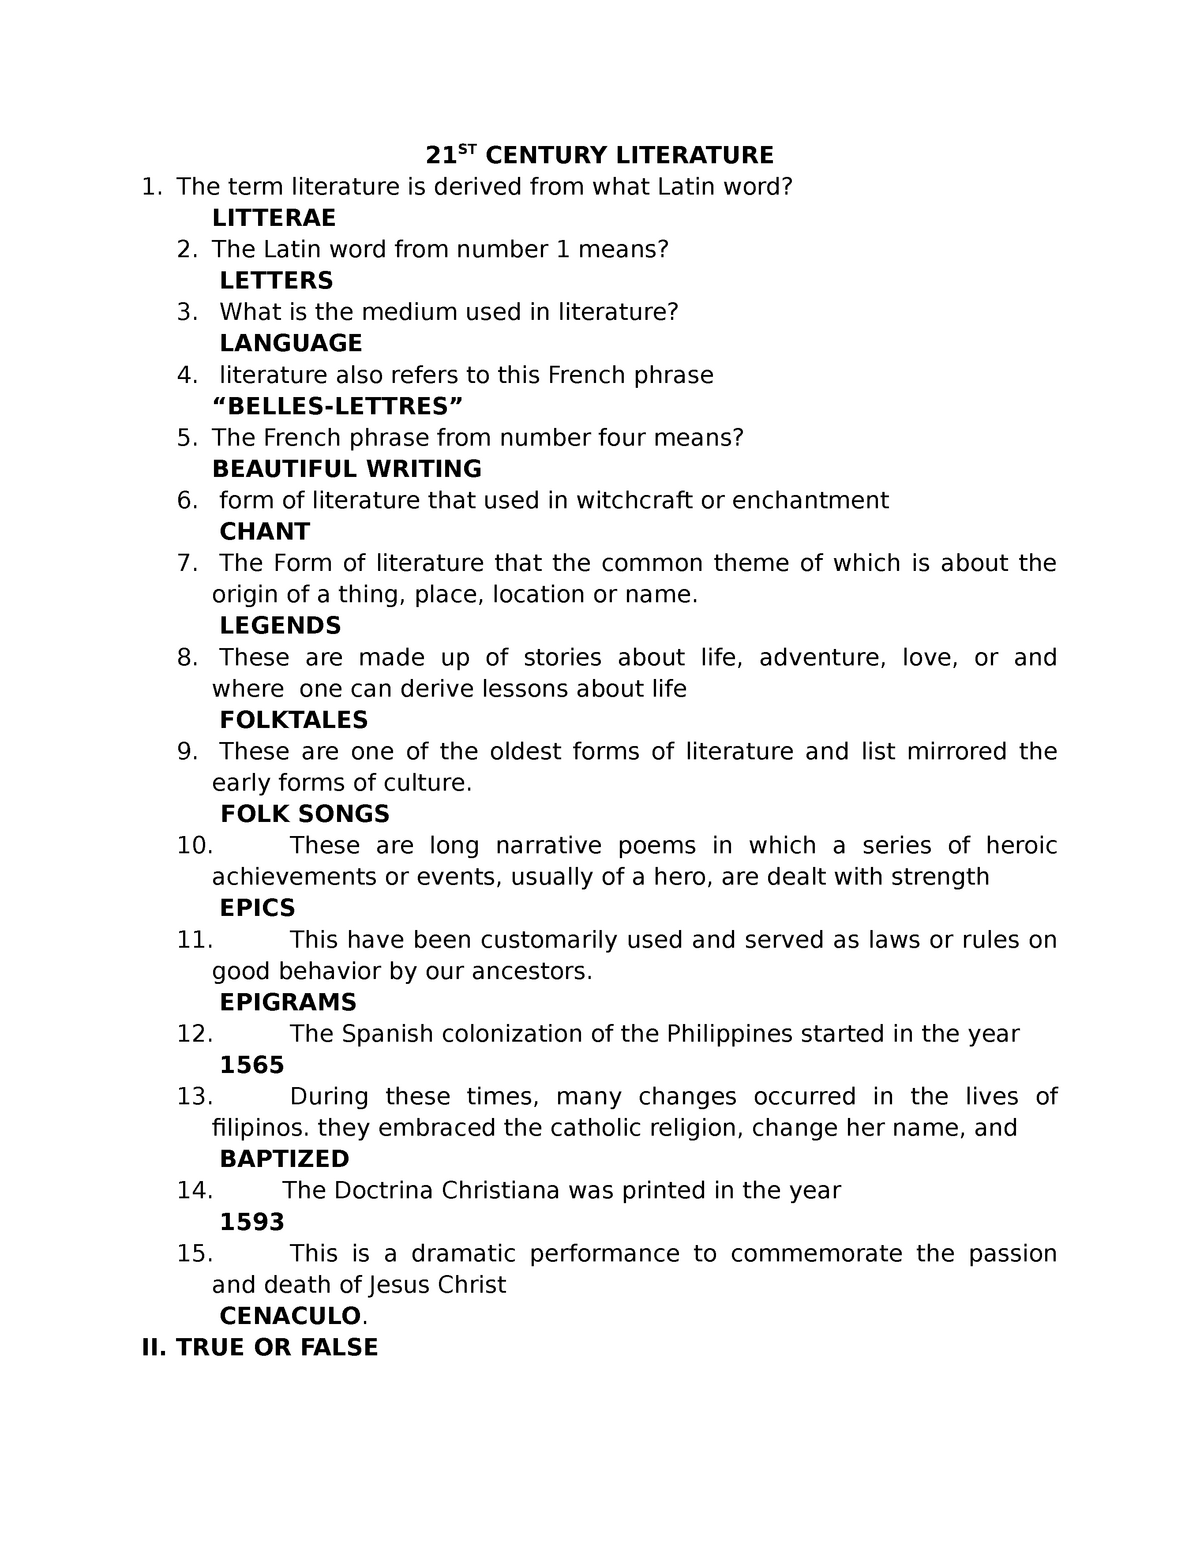 21st century literature reviewer with answer key